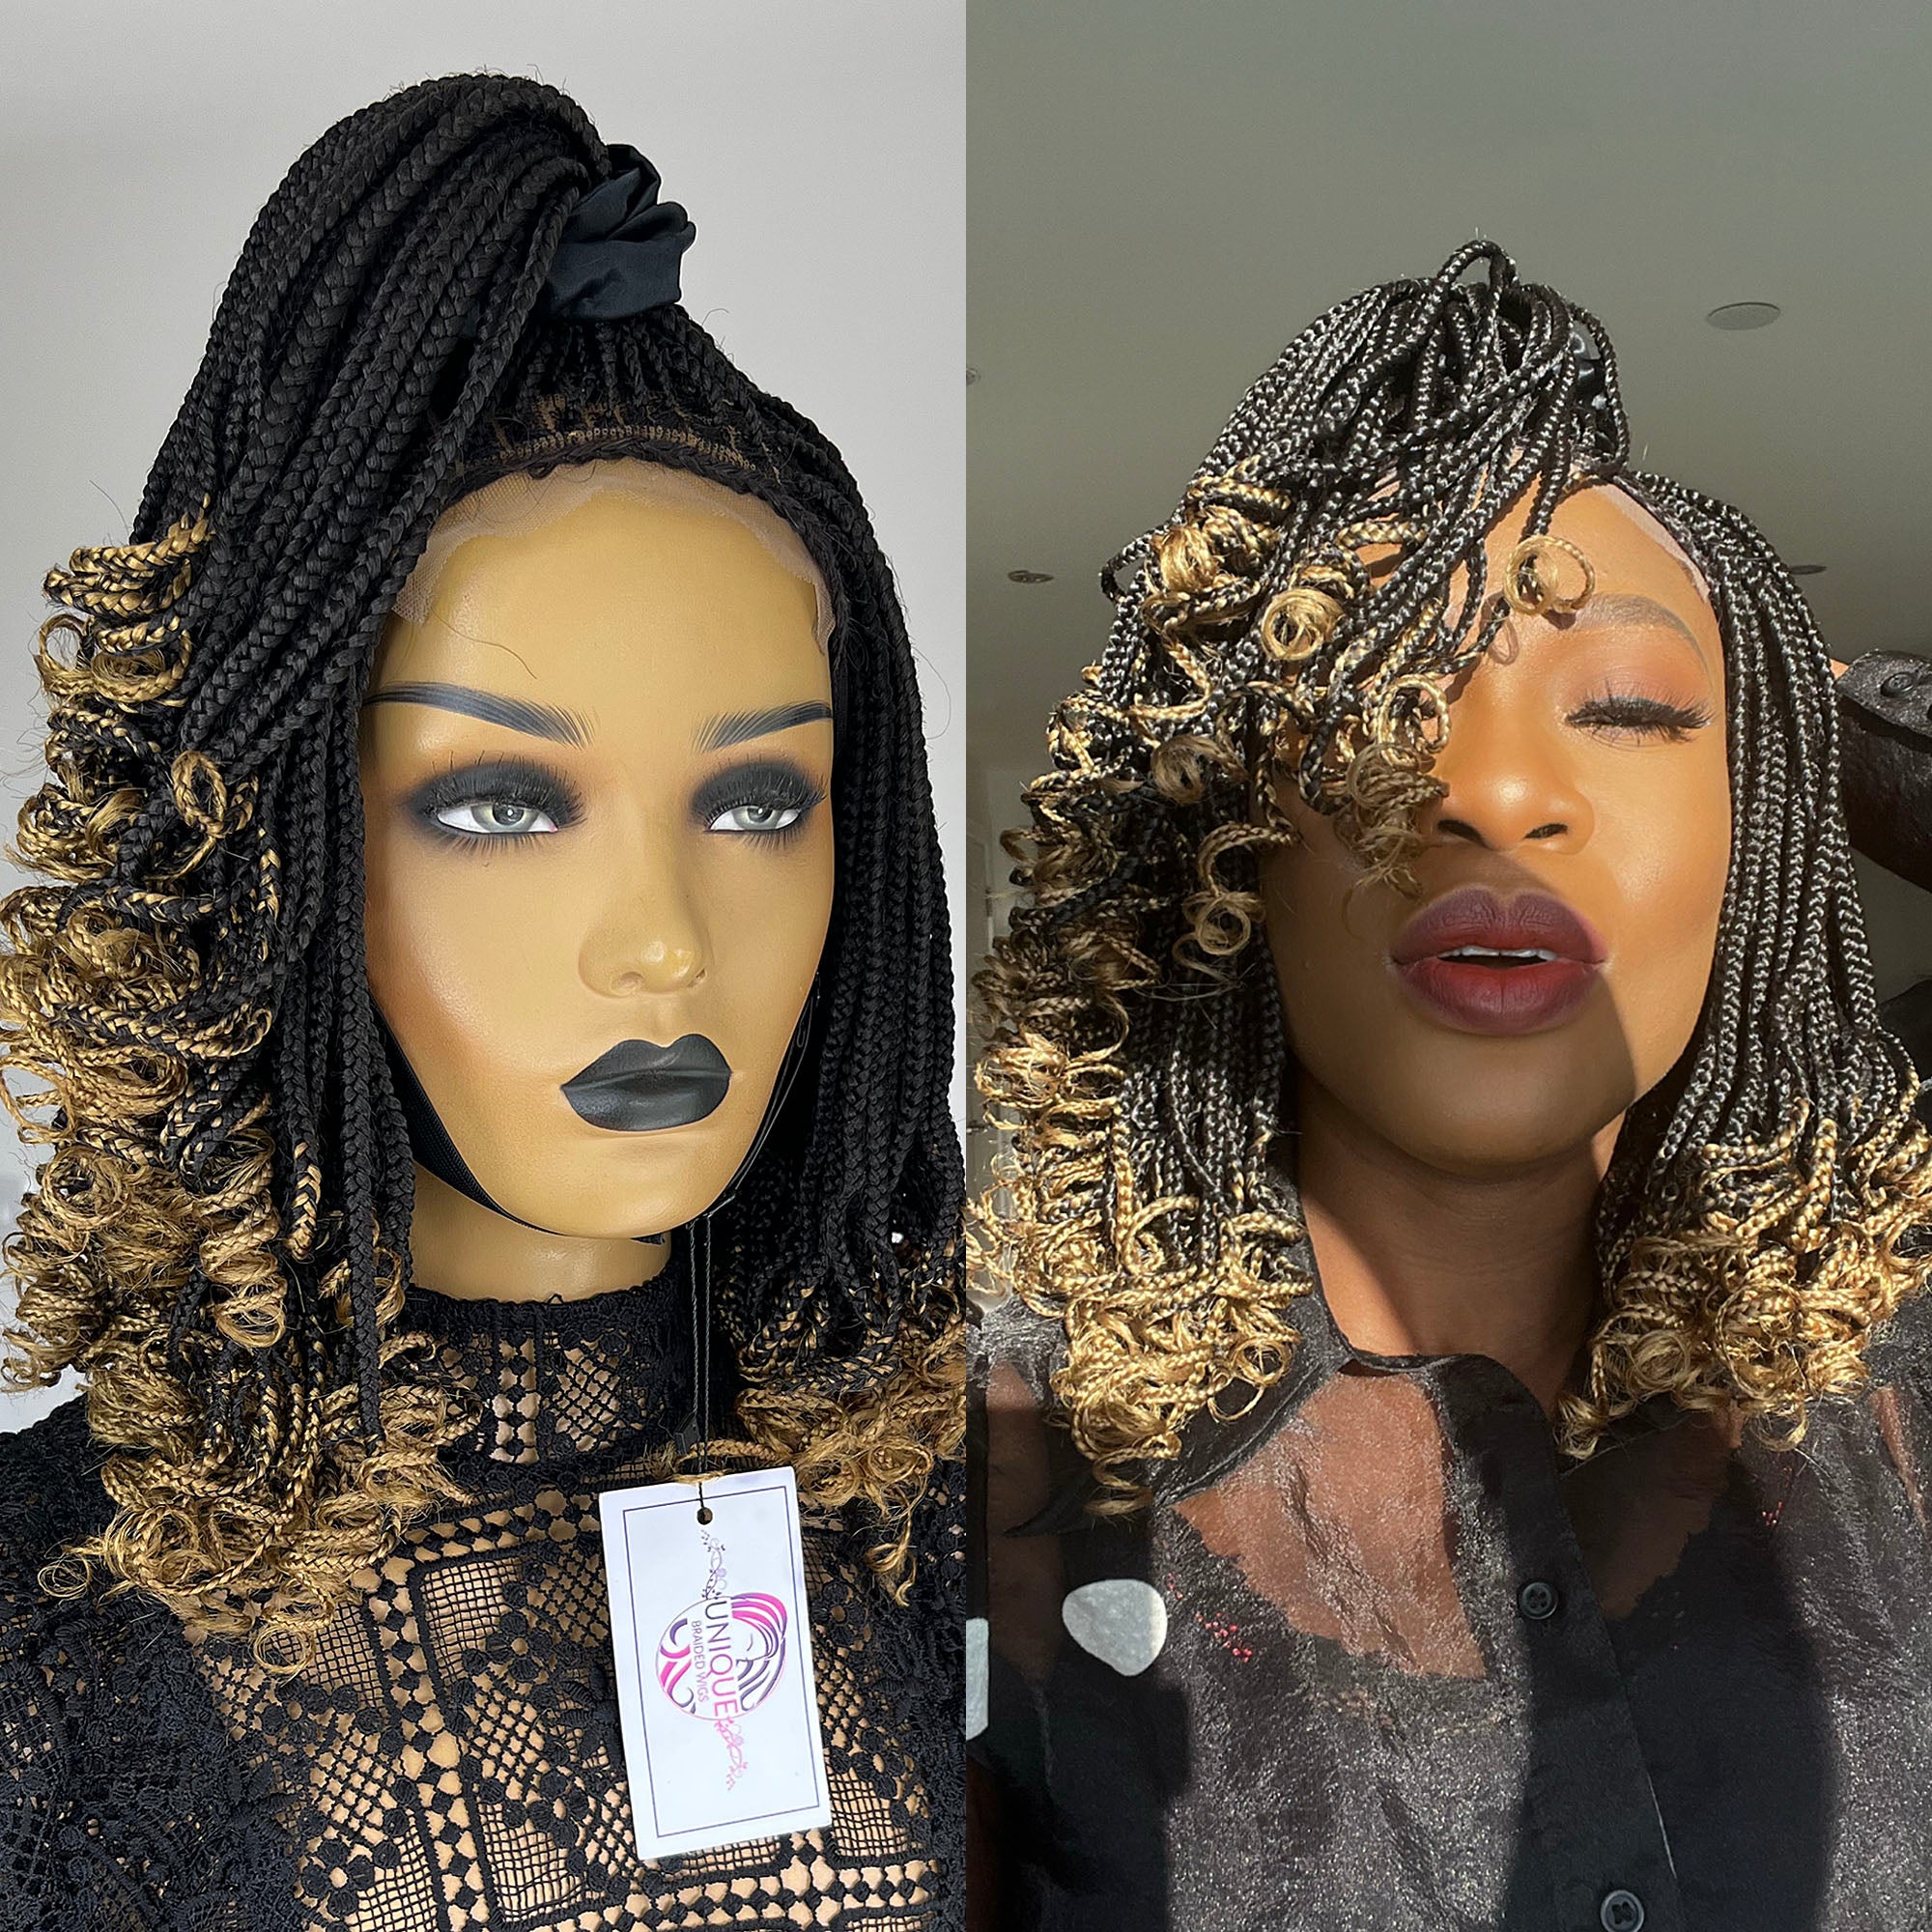 Knotless Braided Wig Box Braids Full Lace Braids Wig Ombre Black